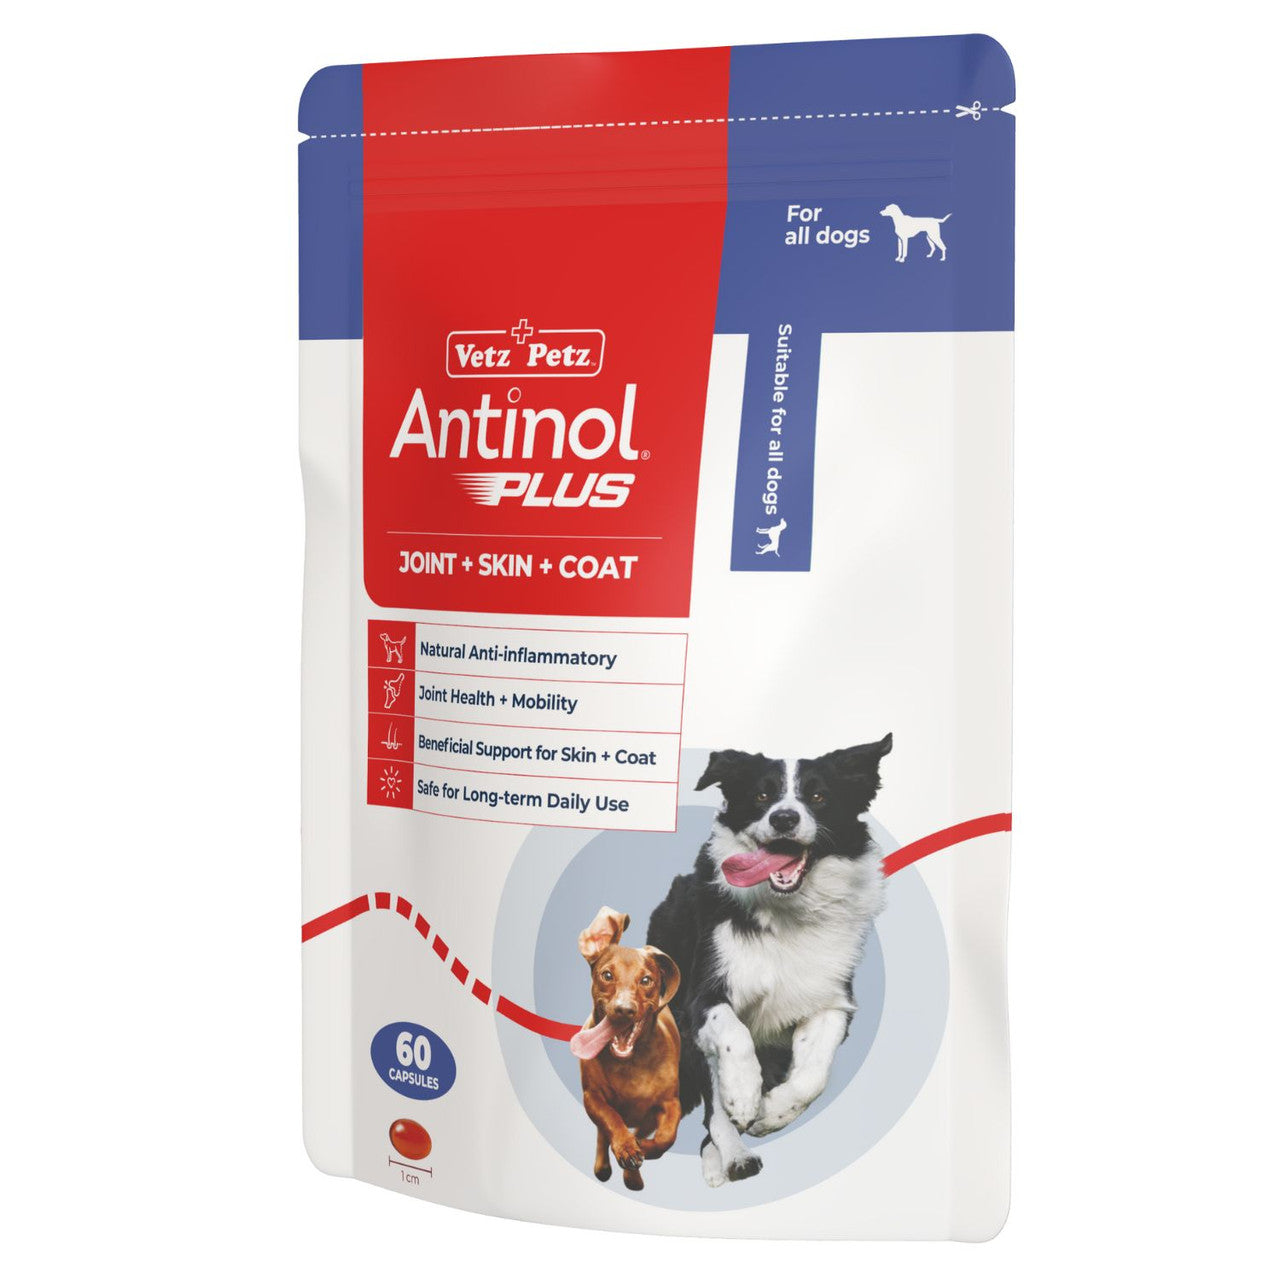 Antinol Rapid for Dogs